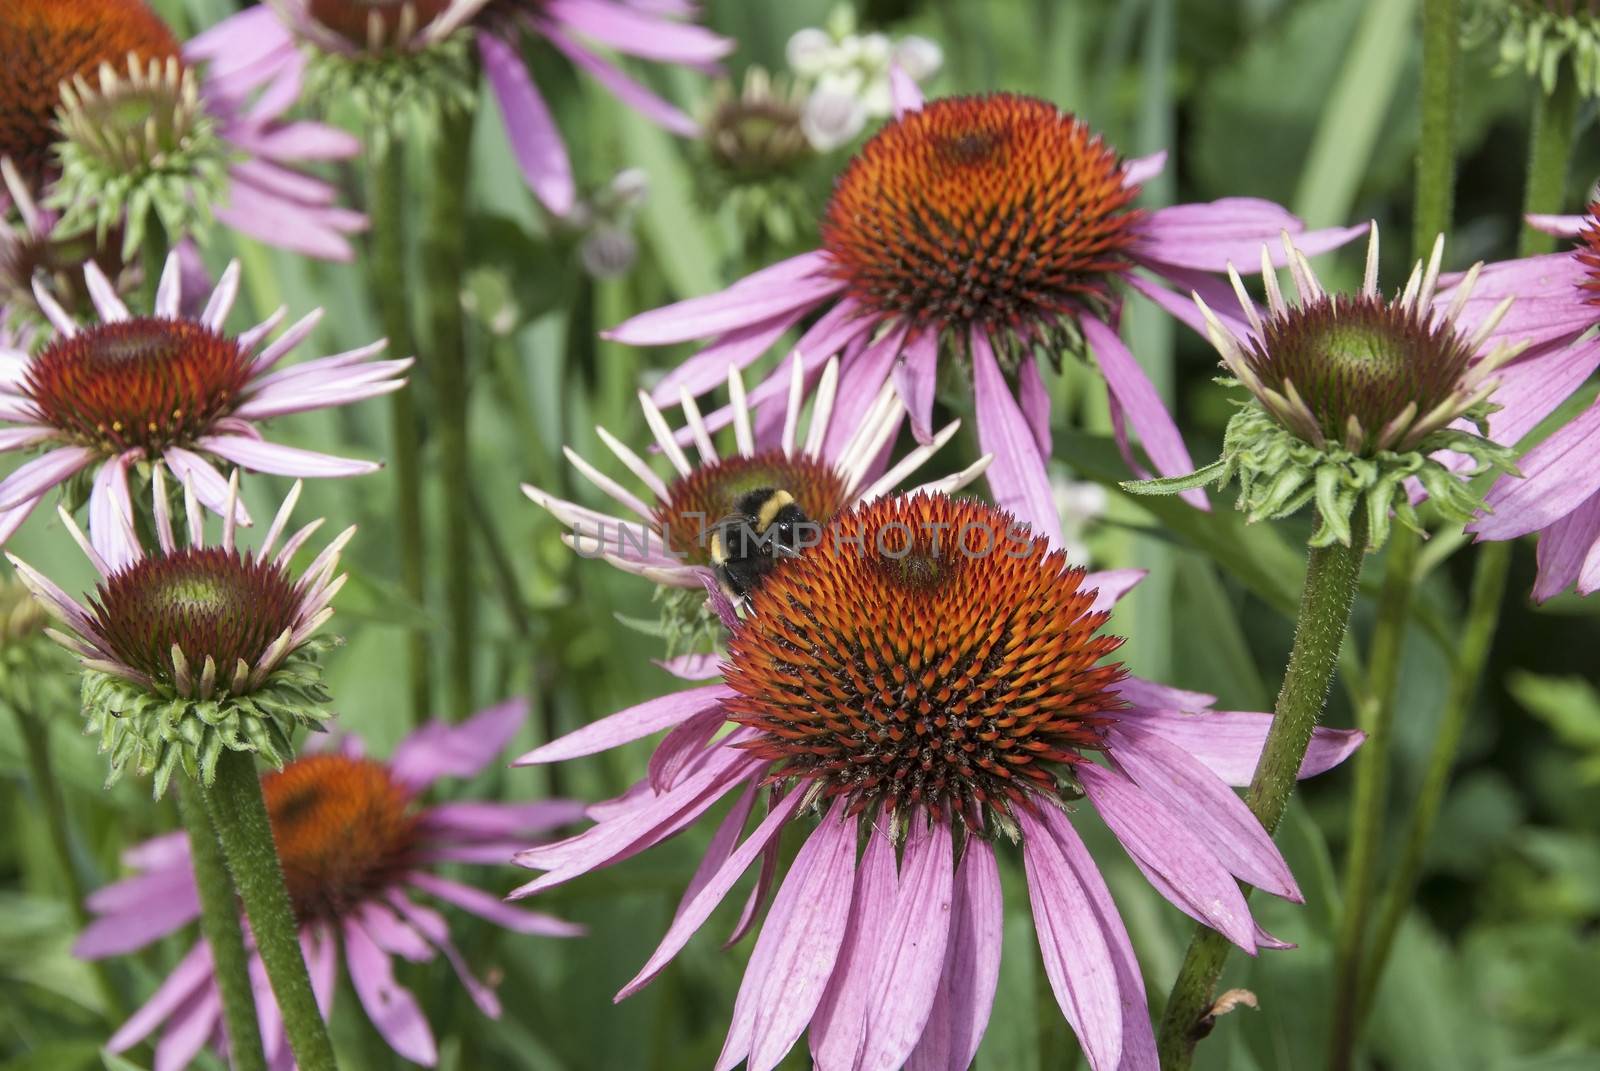 A Closeup of an Echinacea Flower used in Alternative Medicine with a Bee feeding on it